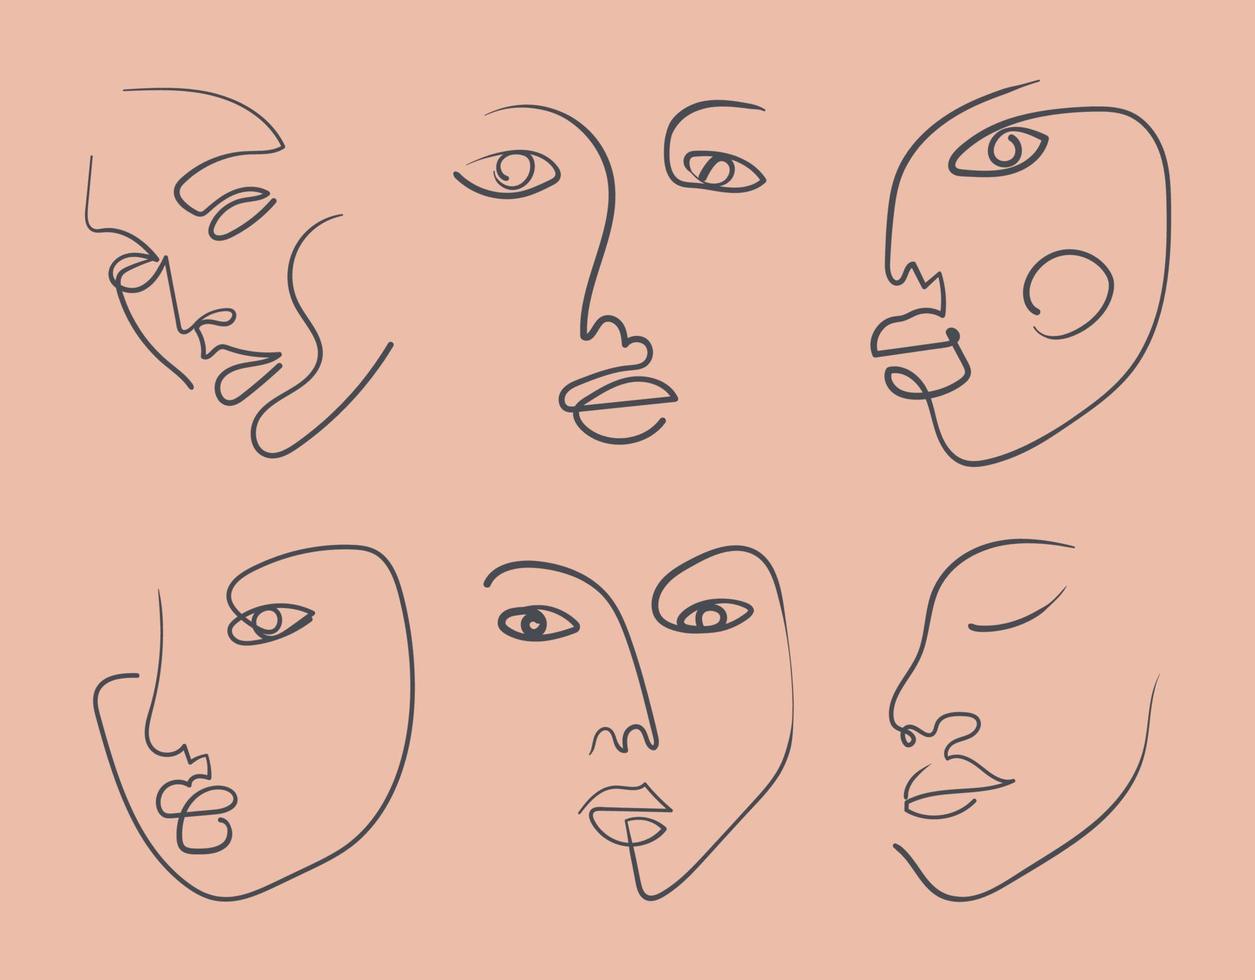 Continuous line, drawing of doodle faces, fashion minimalist concept, vector illustration. Modern fashionable pattern